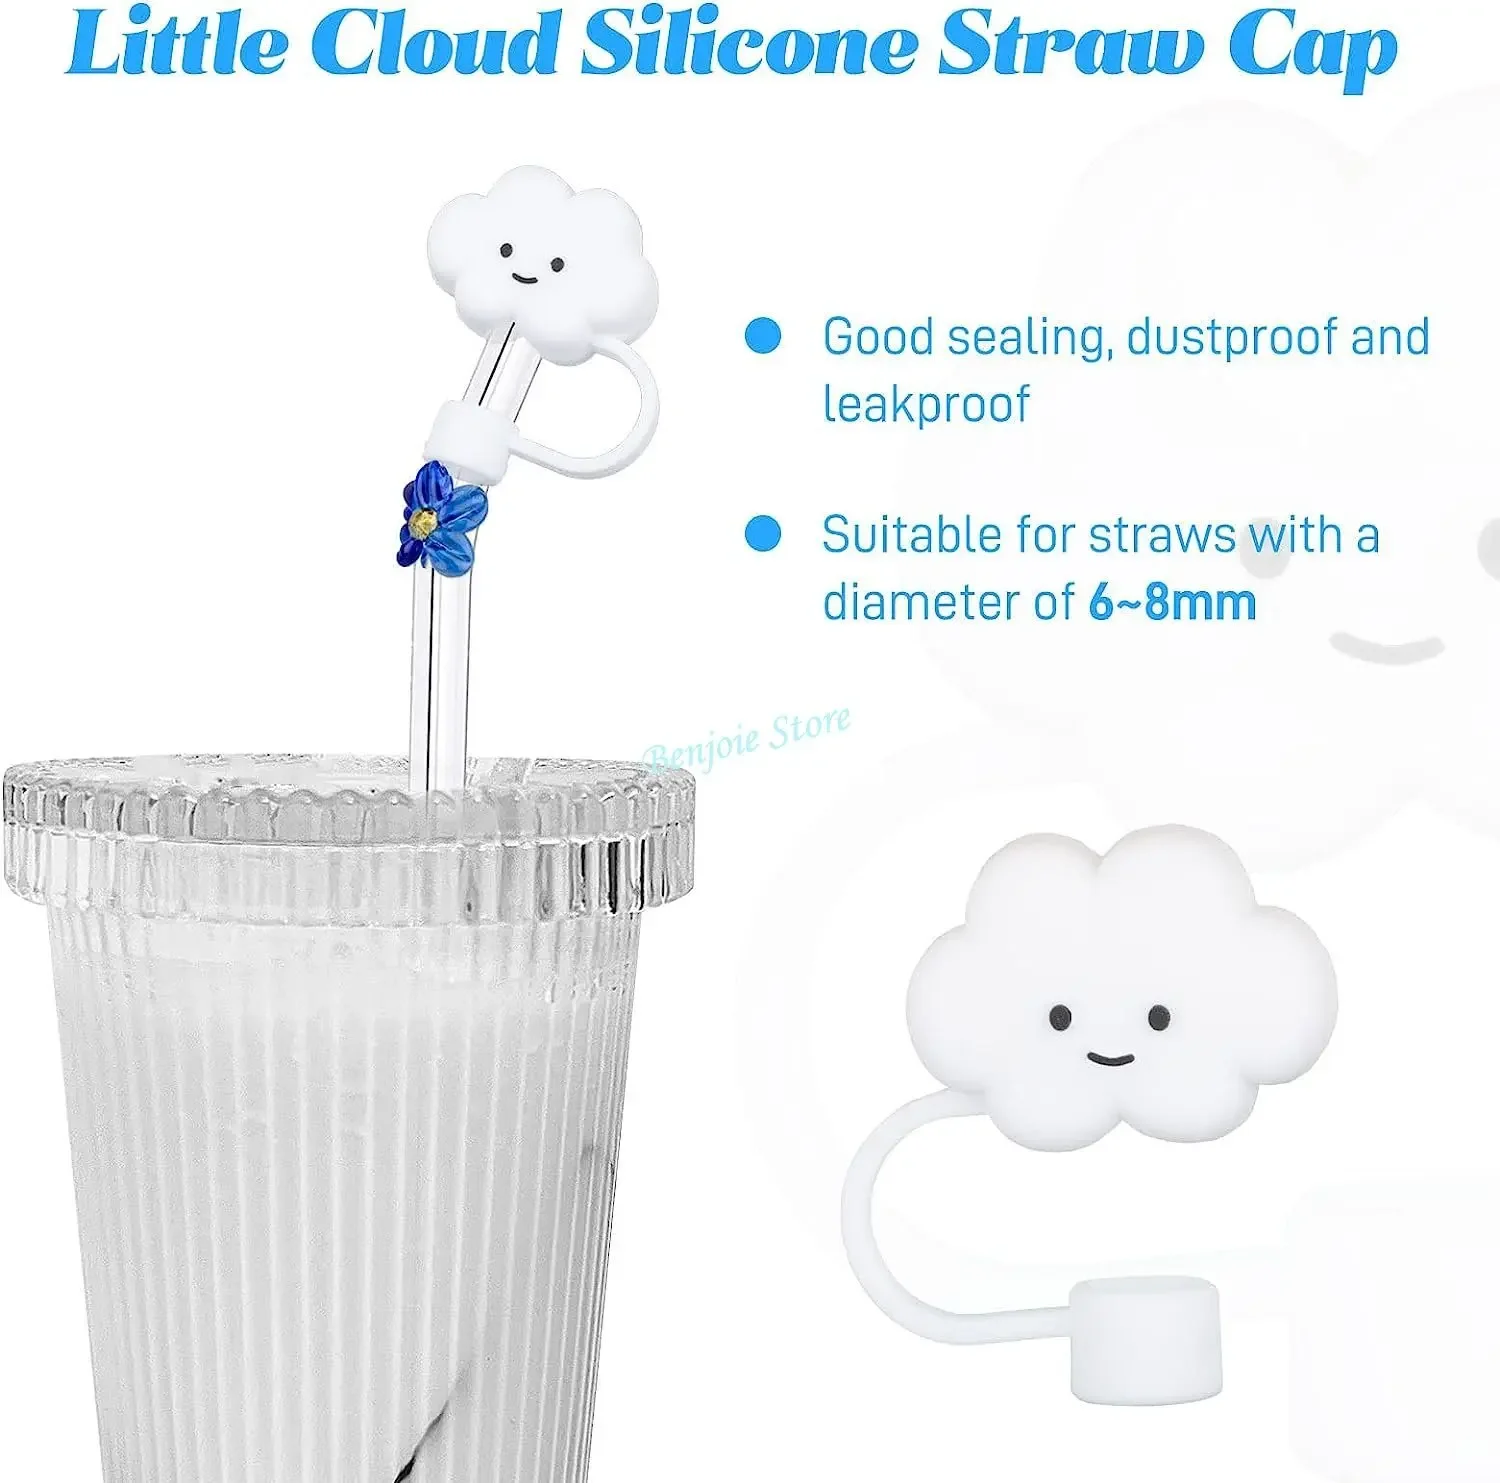 https://ae01.alicdn.com/kf/S954ca4d64e9344c28659f76cf23ffe1aV/6-8mm-Silicone-Straw-Tips-Cover-Straw-Covers-Cap-Reusable-Drinking-Straws-Cloud-Shape-Straw-Protector.jpg